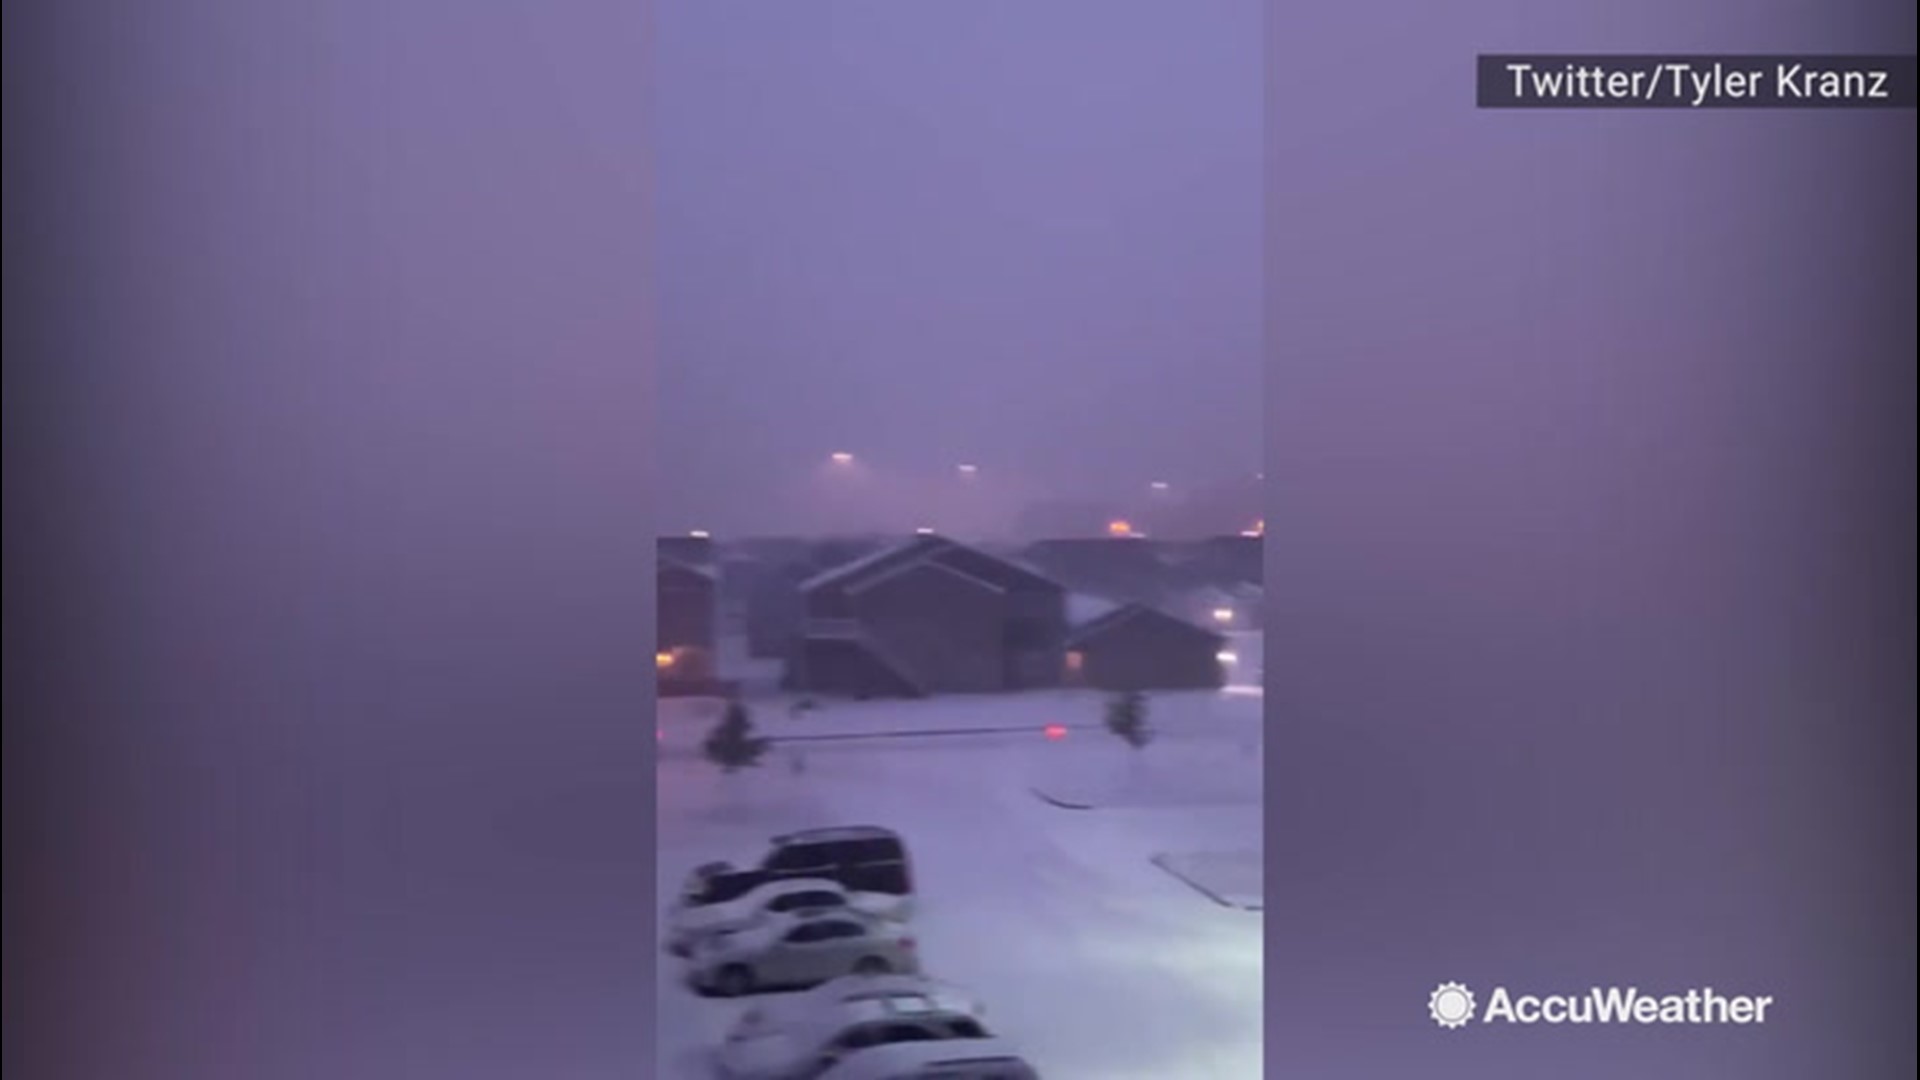 Morning commuters were greeted to a winter storm in autumn in Bismarch, North Dakota, on Oct. 10. Blowing snow can be seen reducing visibility. Multiple cars slipping off the roads were reported.